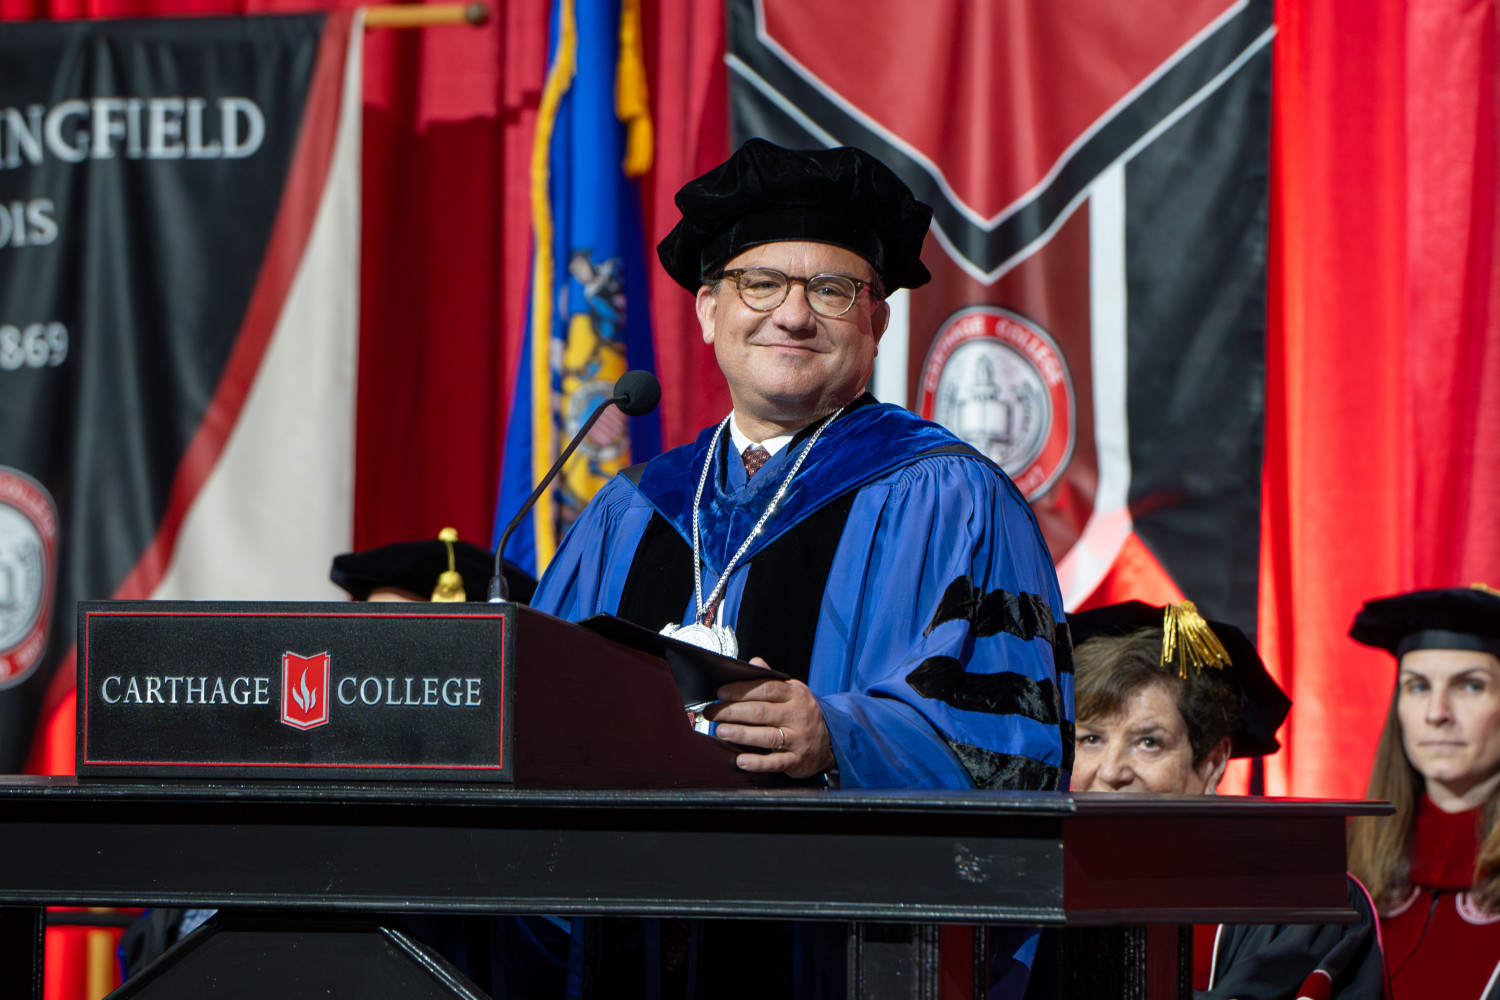 President John Swallow at the Commencement Ceremony.